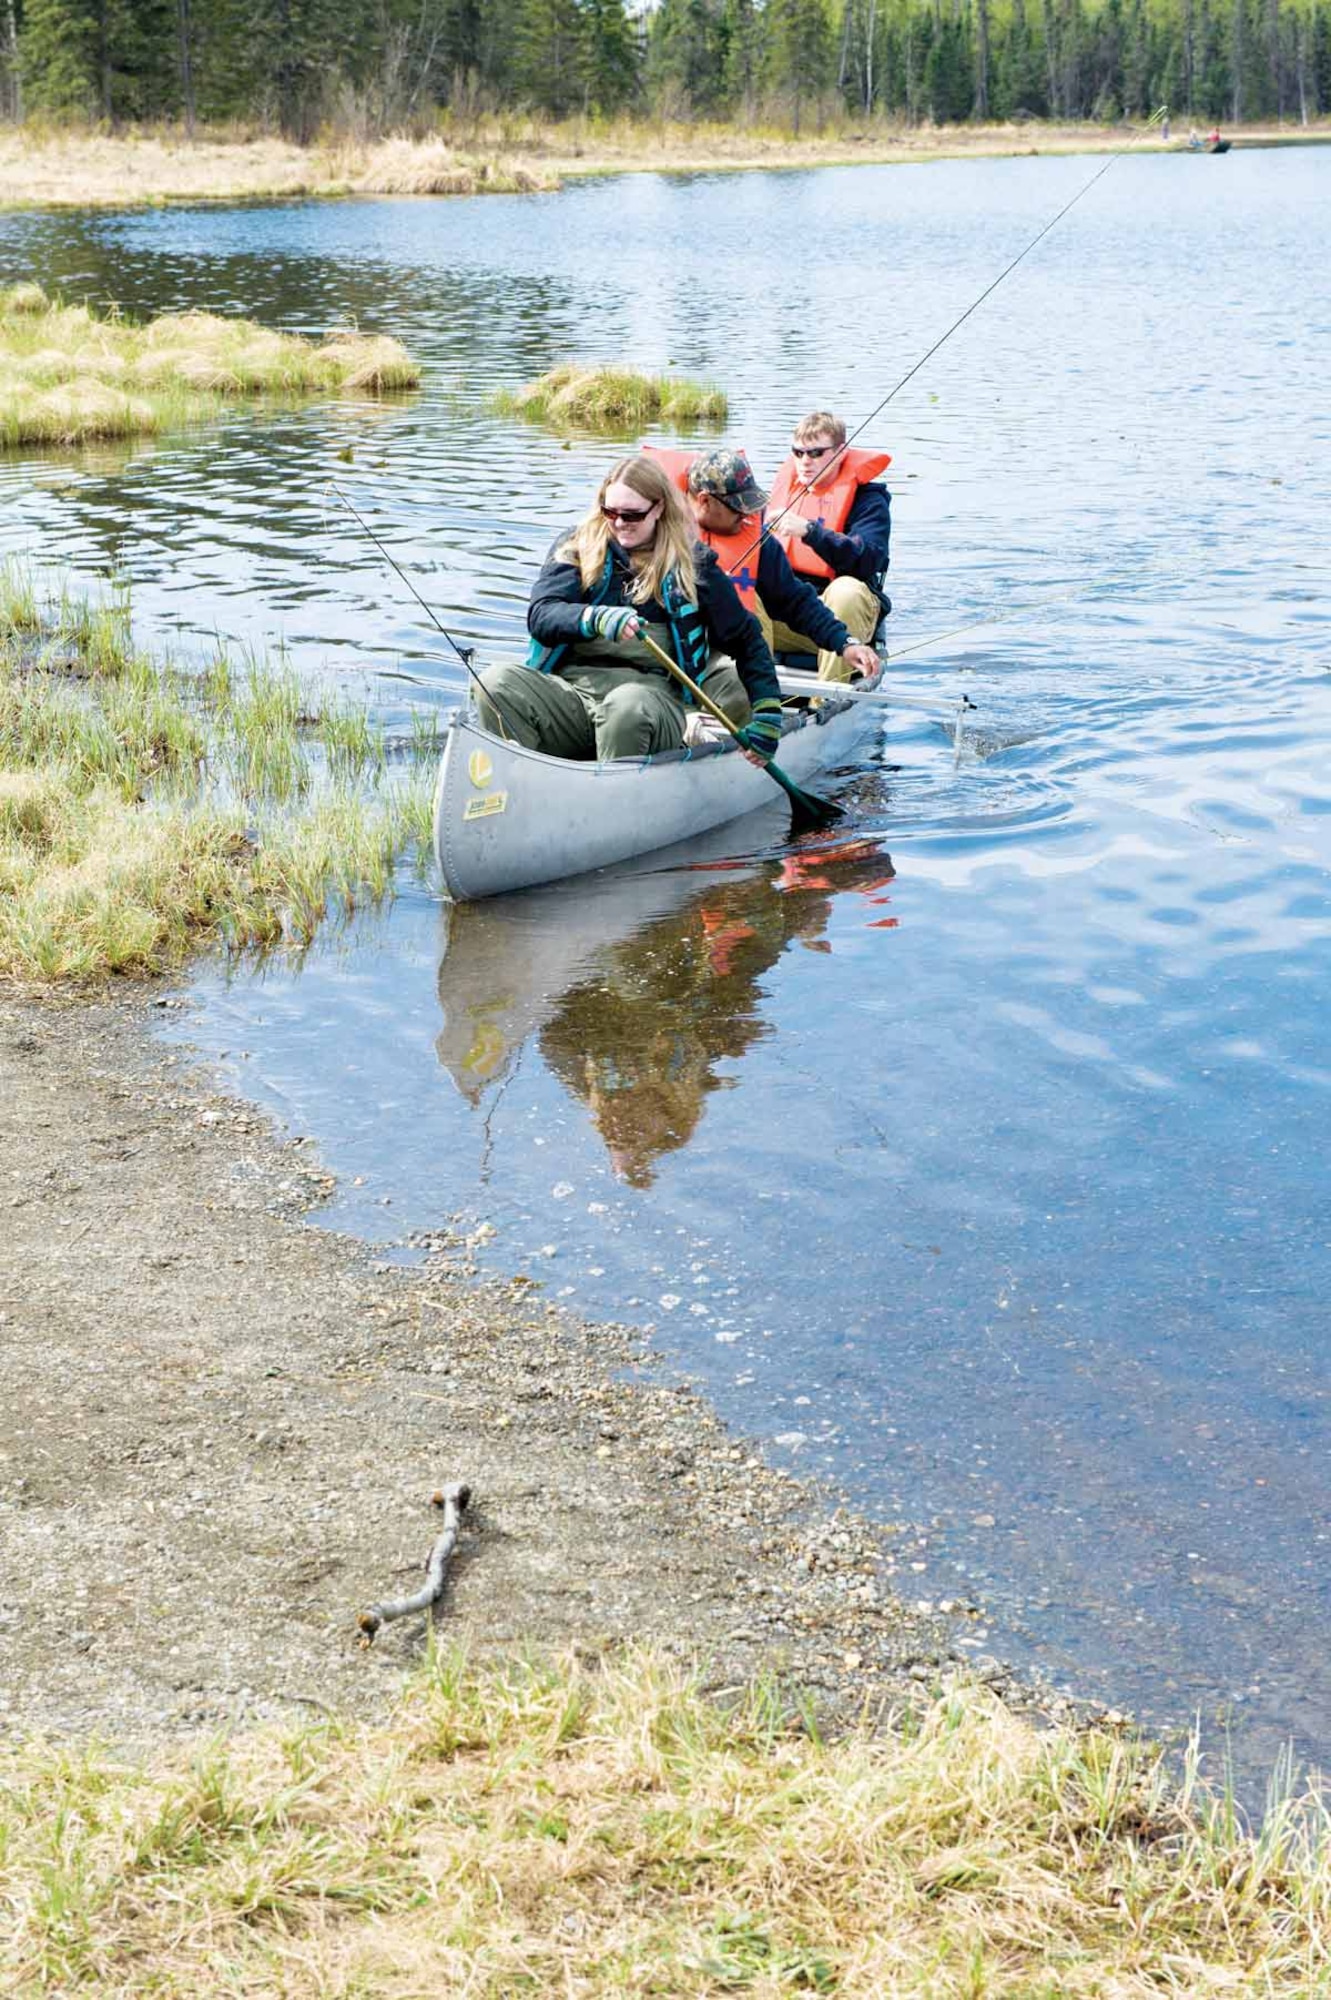 Janelle Clough, her fiancé Sgt. Juan Aguilar of the Warrior Transition Battalion, and Sgt. George Campbell, also with the Warrior Transition Battalion, paddle back in from fly fishing on Green Lake. (U.S. Air Force photo/Johnathon Green)